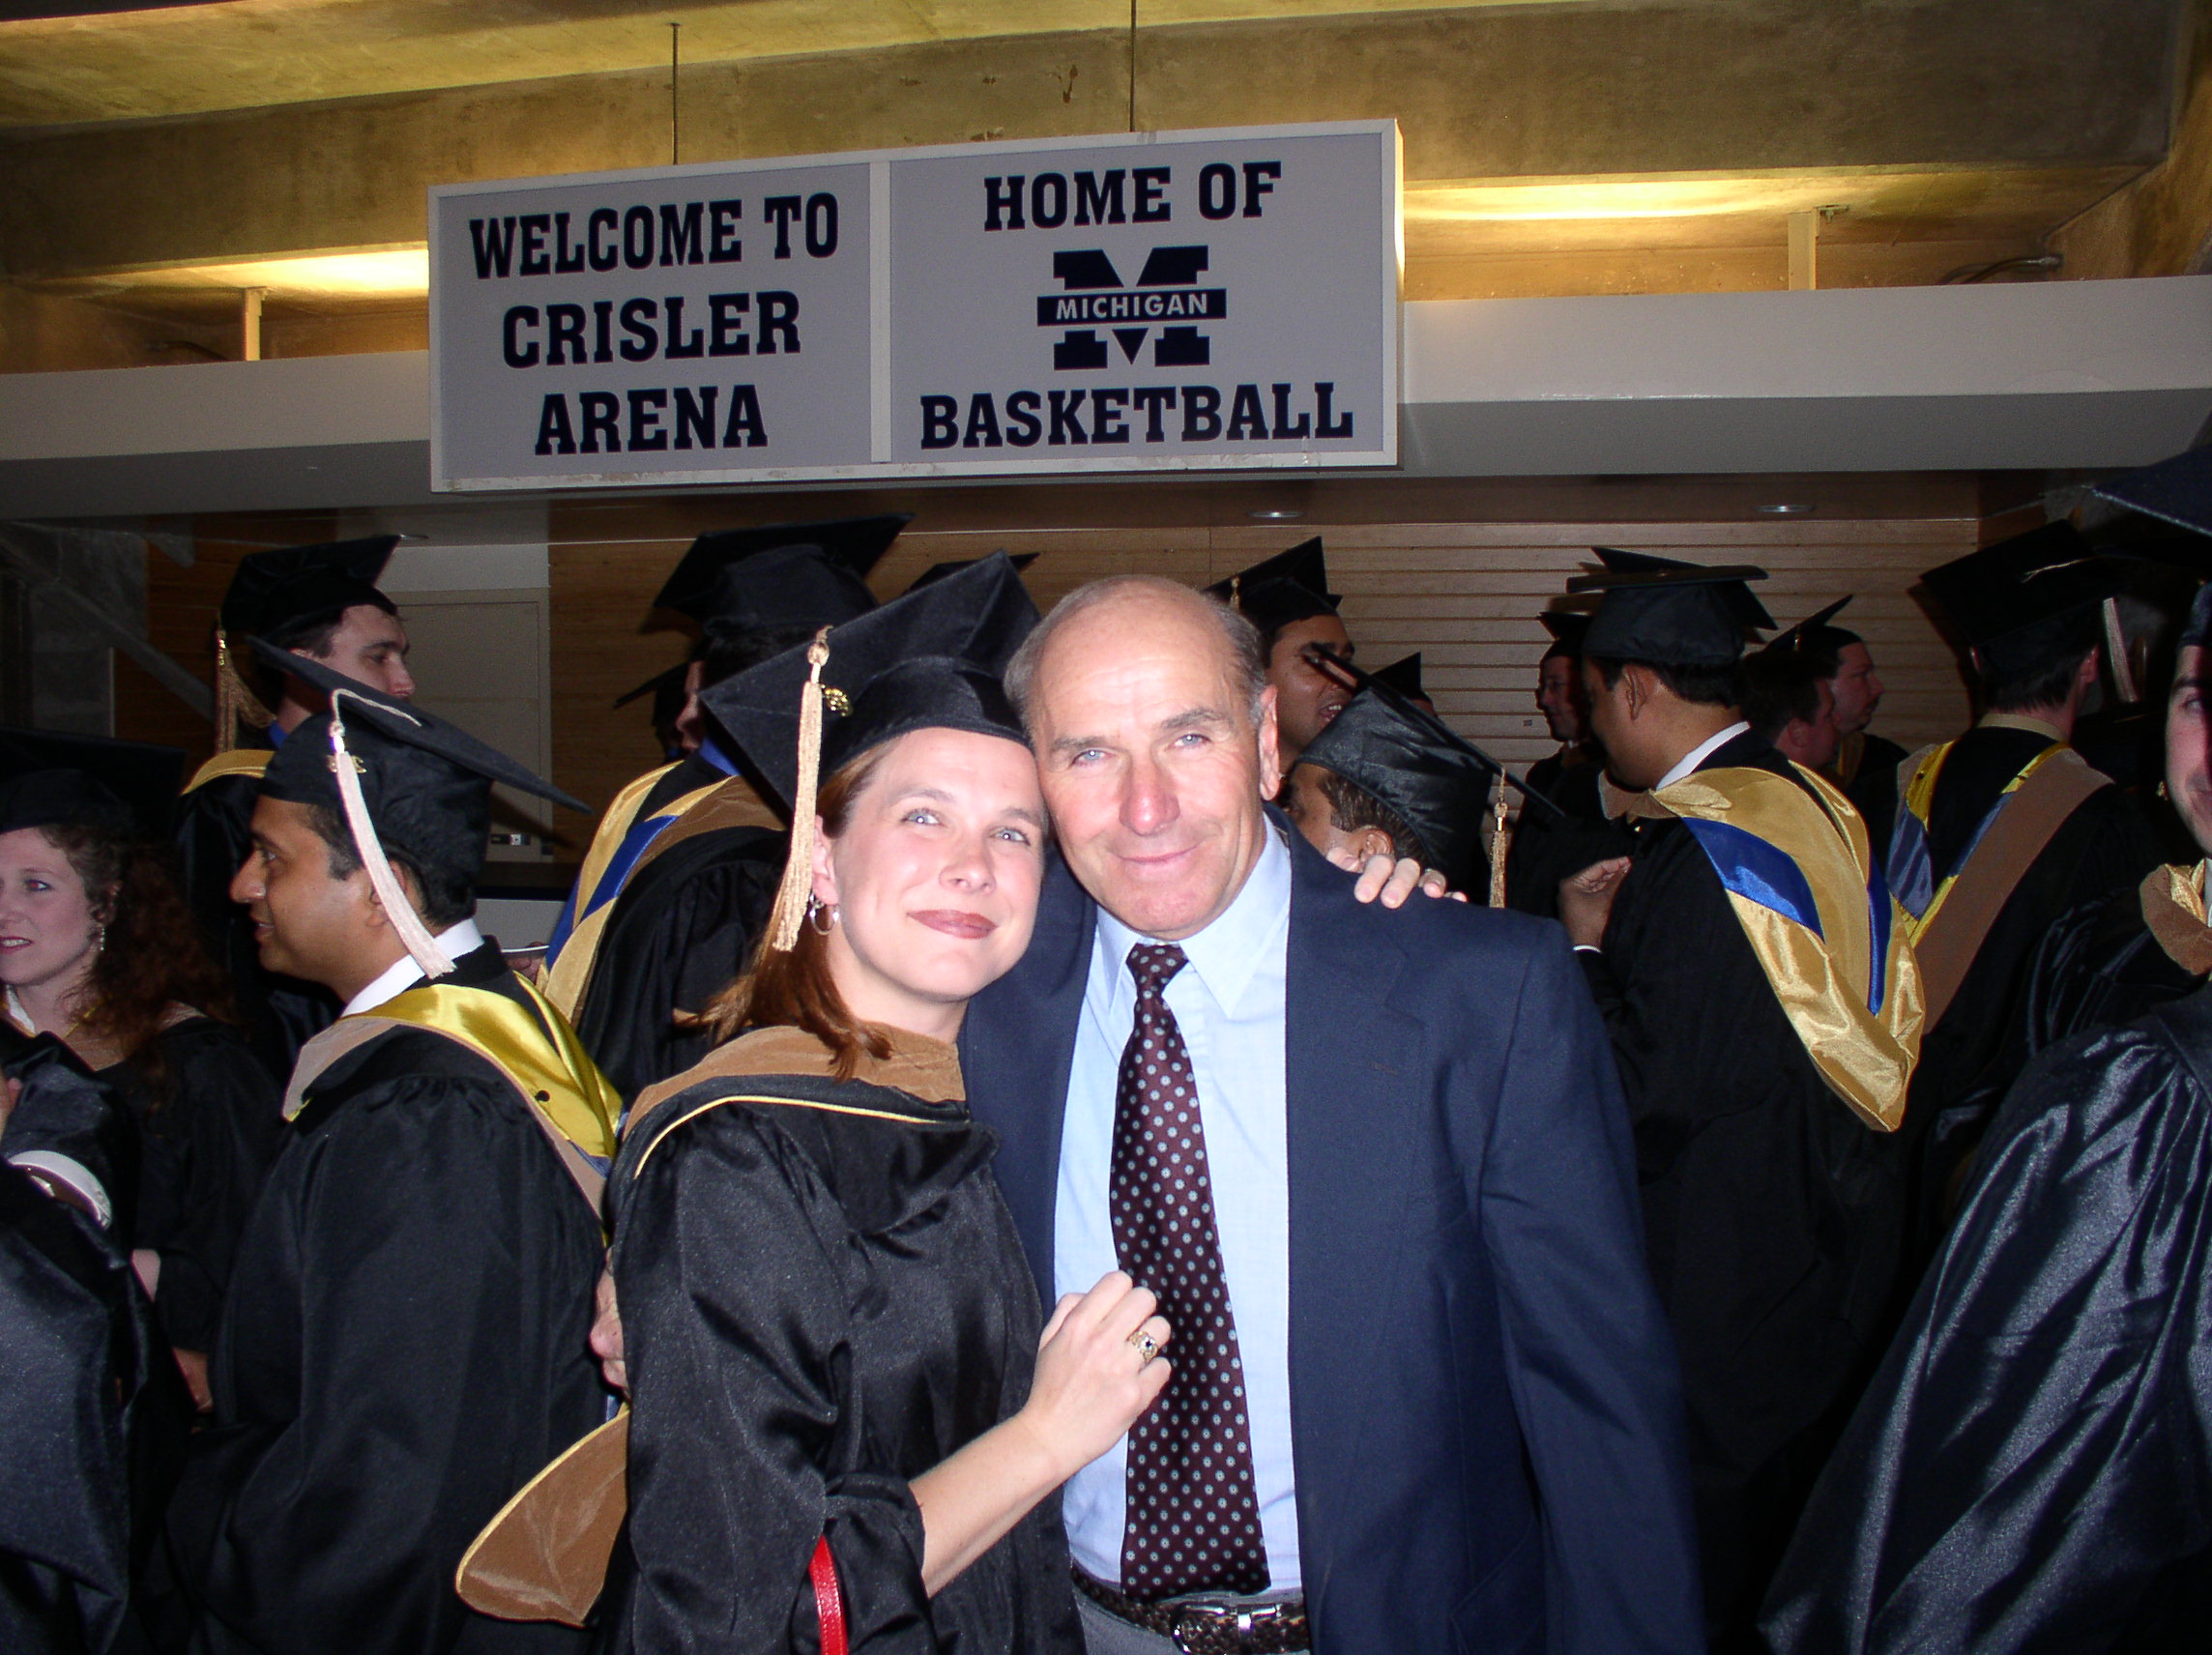 Me and my dad at business school graduation. It wasn't easy earning the right to wear that masters hood.